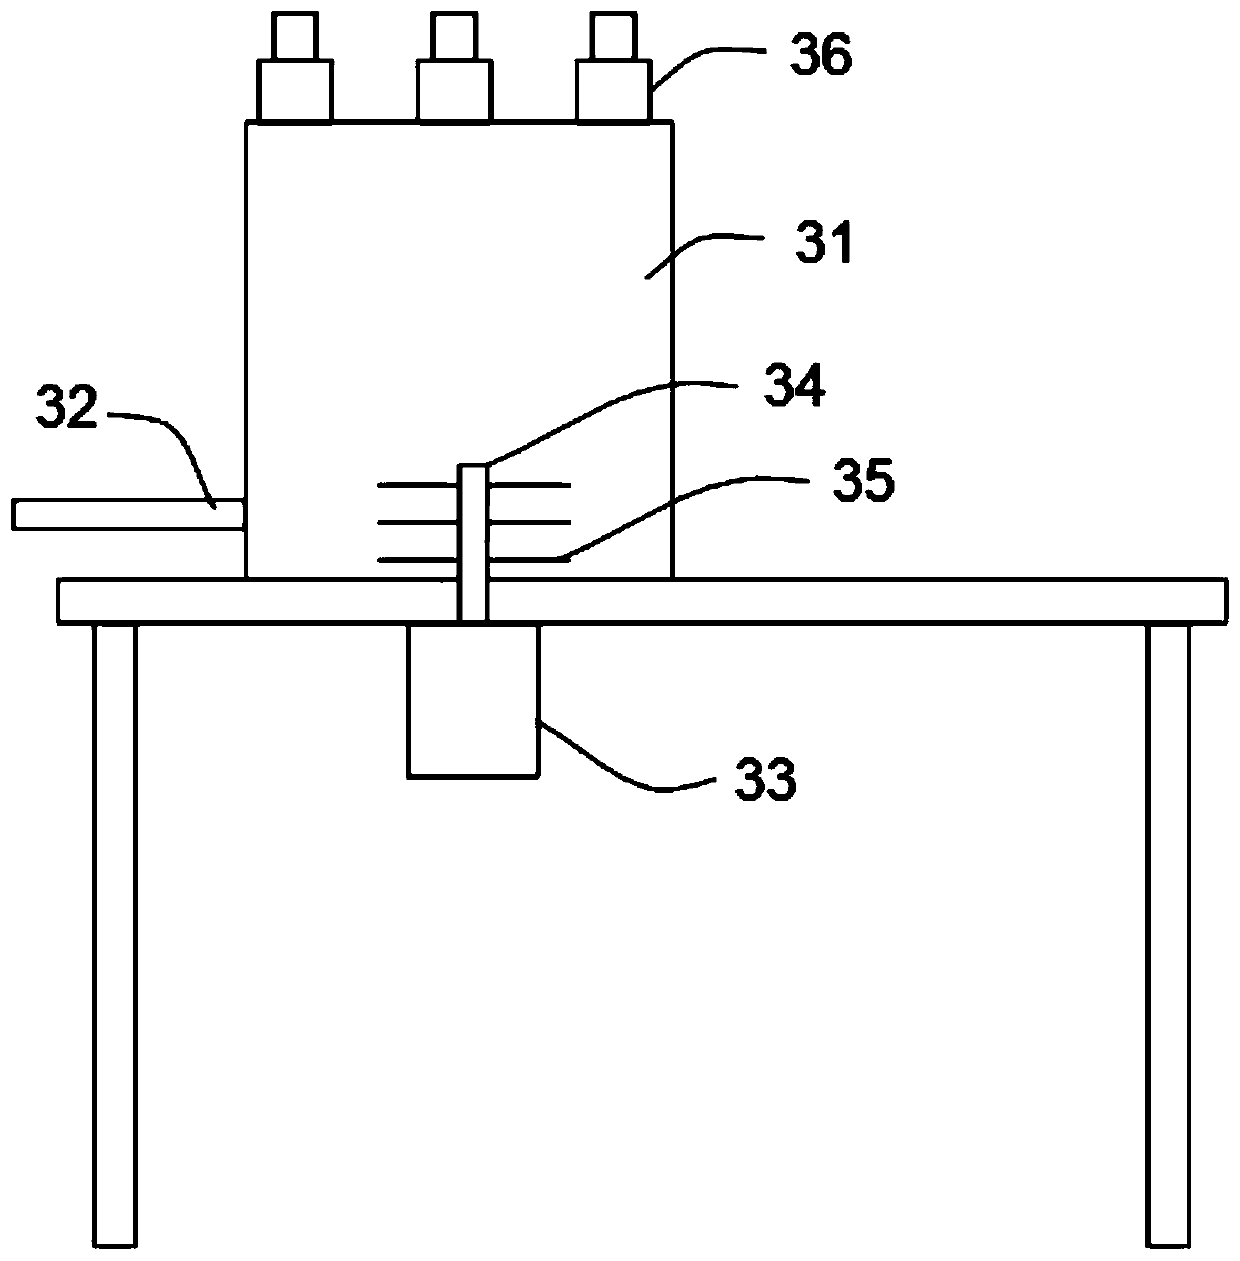 Semiautomatic infusion preparation apparatus for neonatal parenteral nutrient admixture